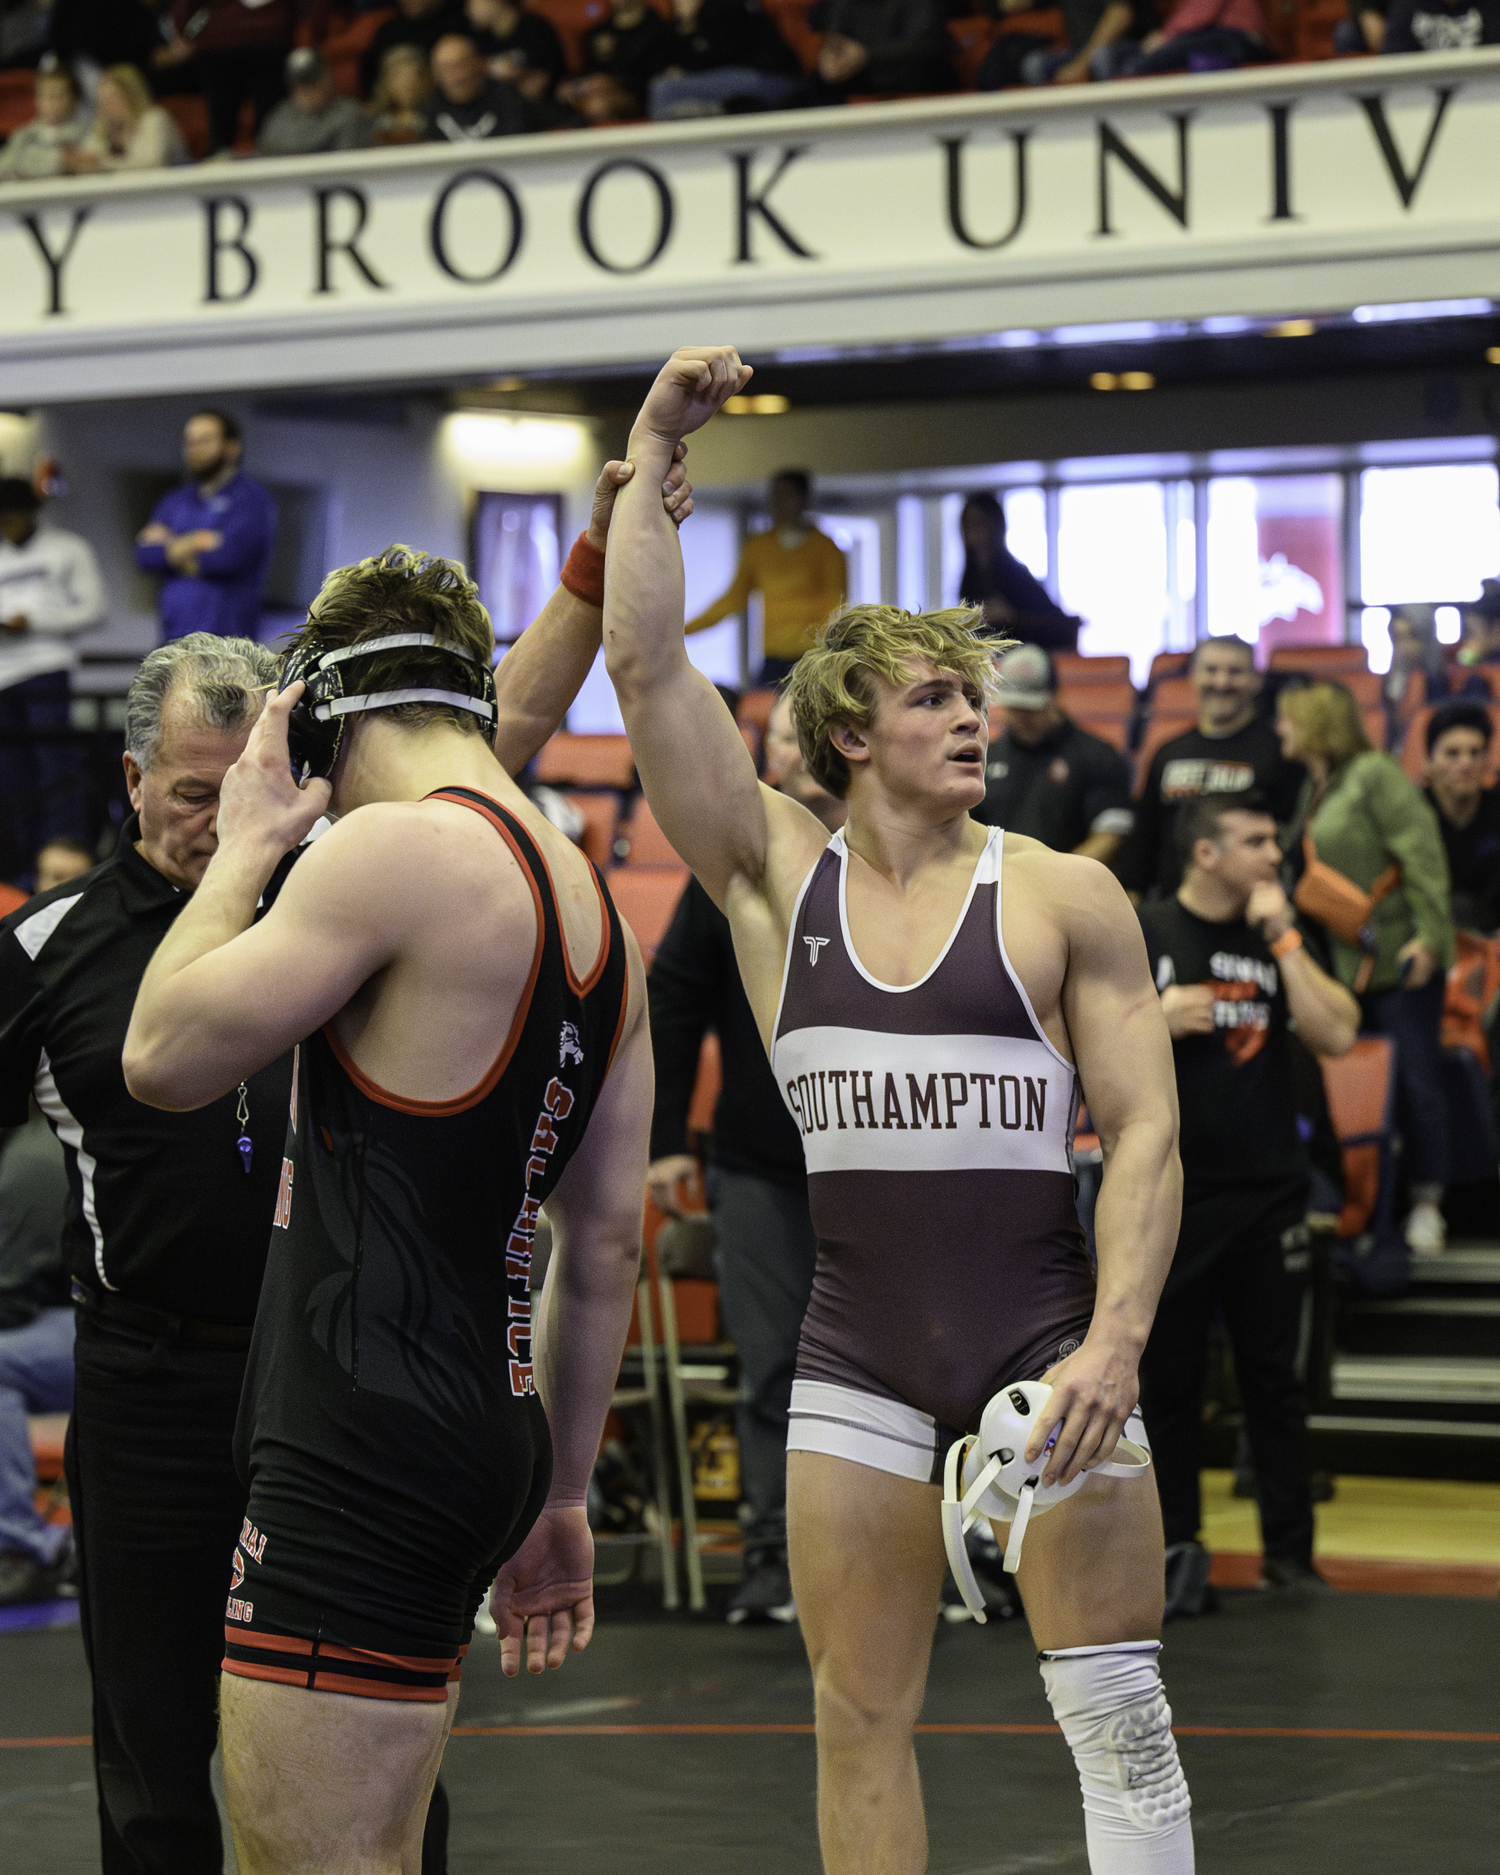 Cole Fox gets his arm raised after winning his 